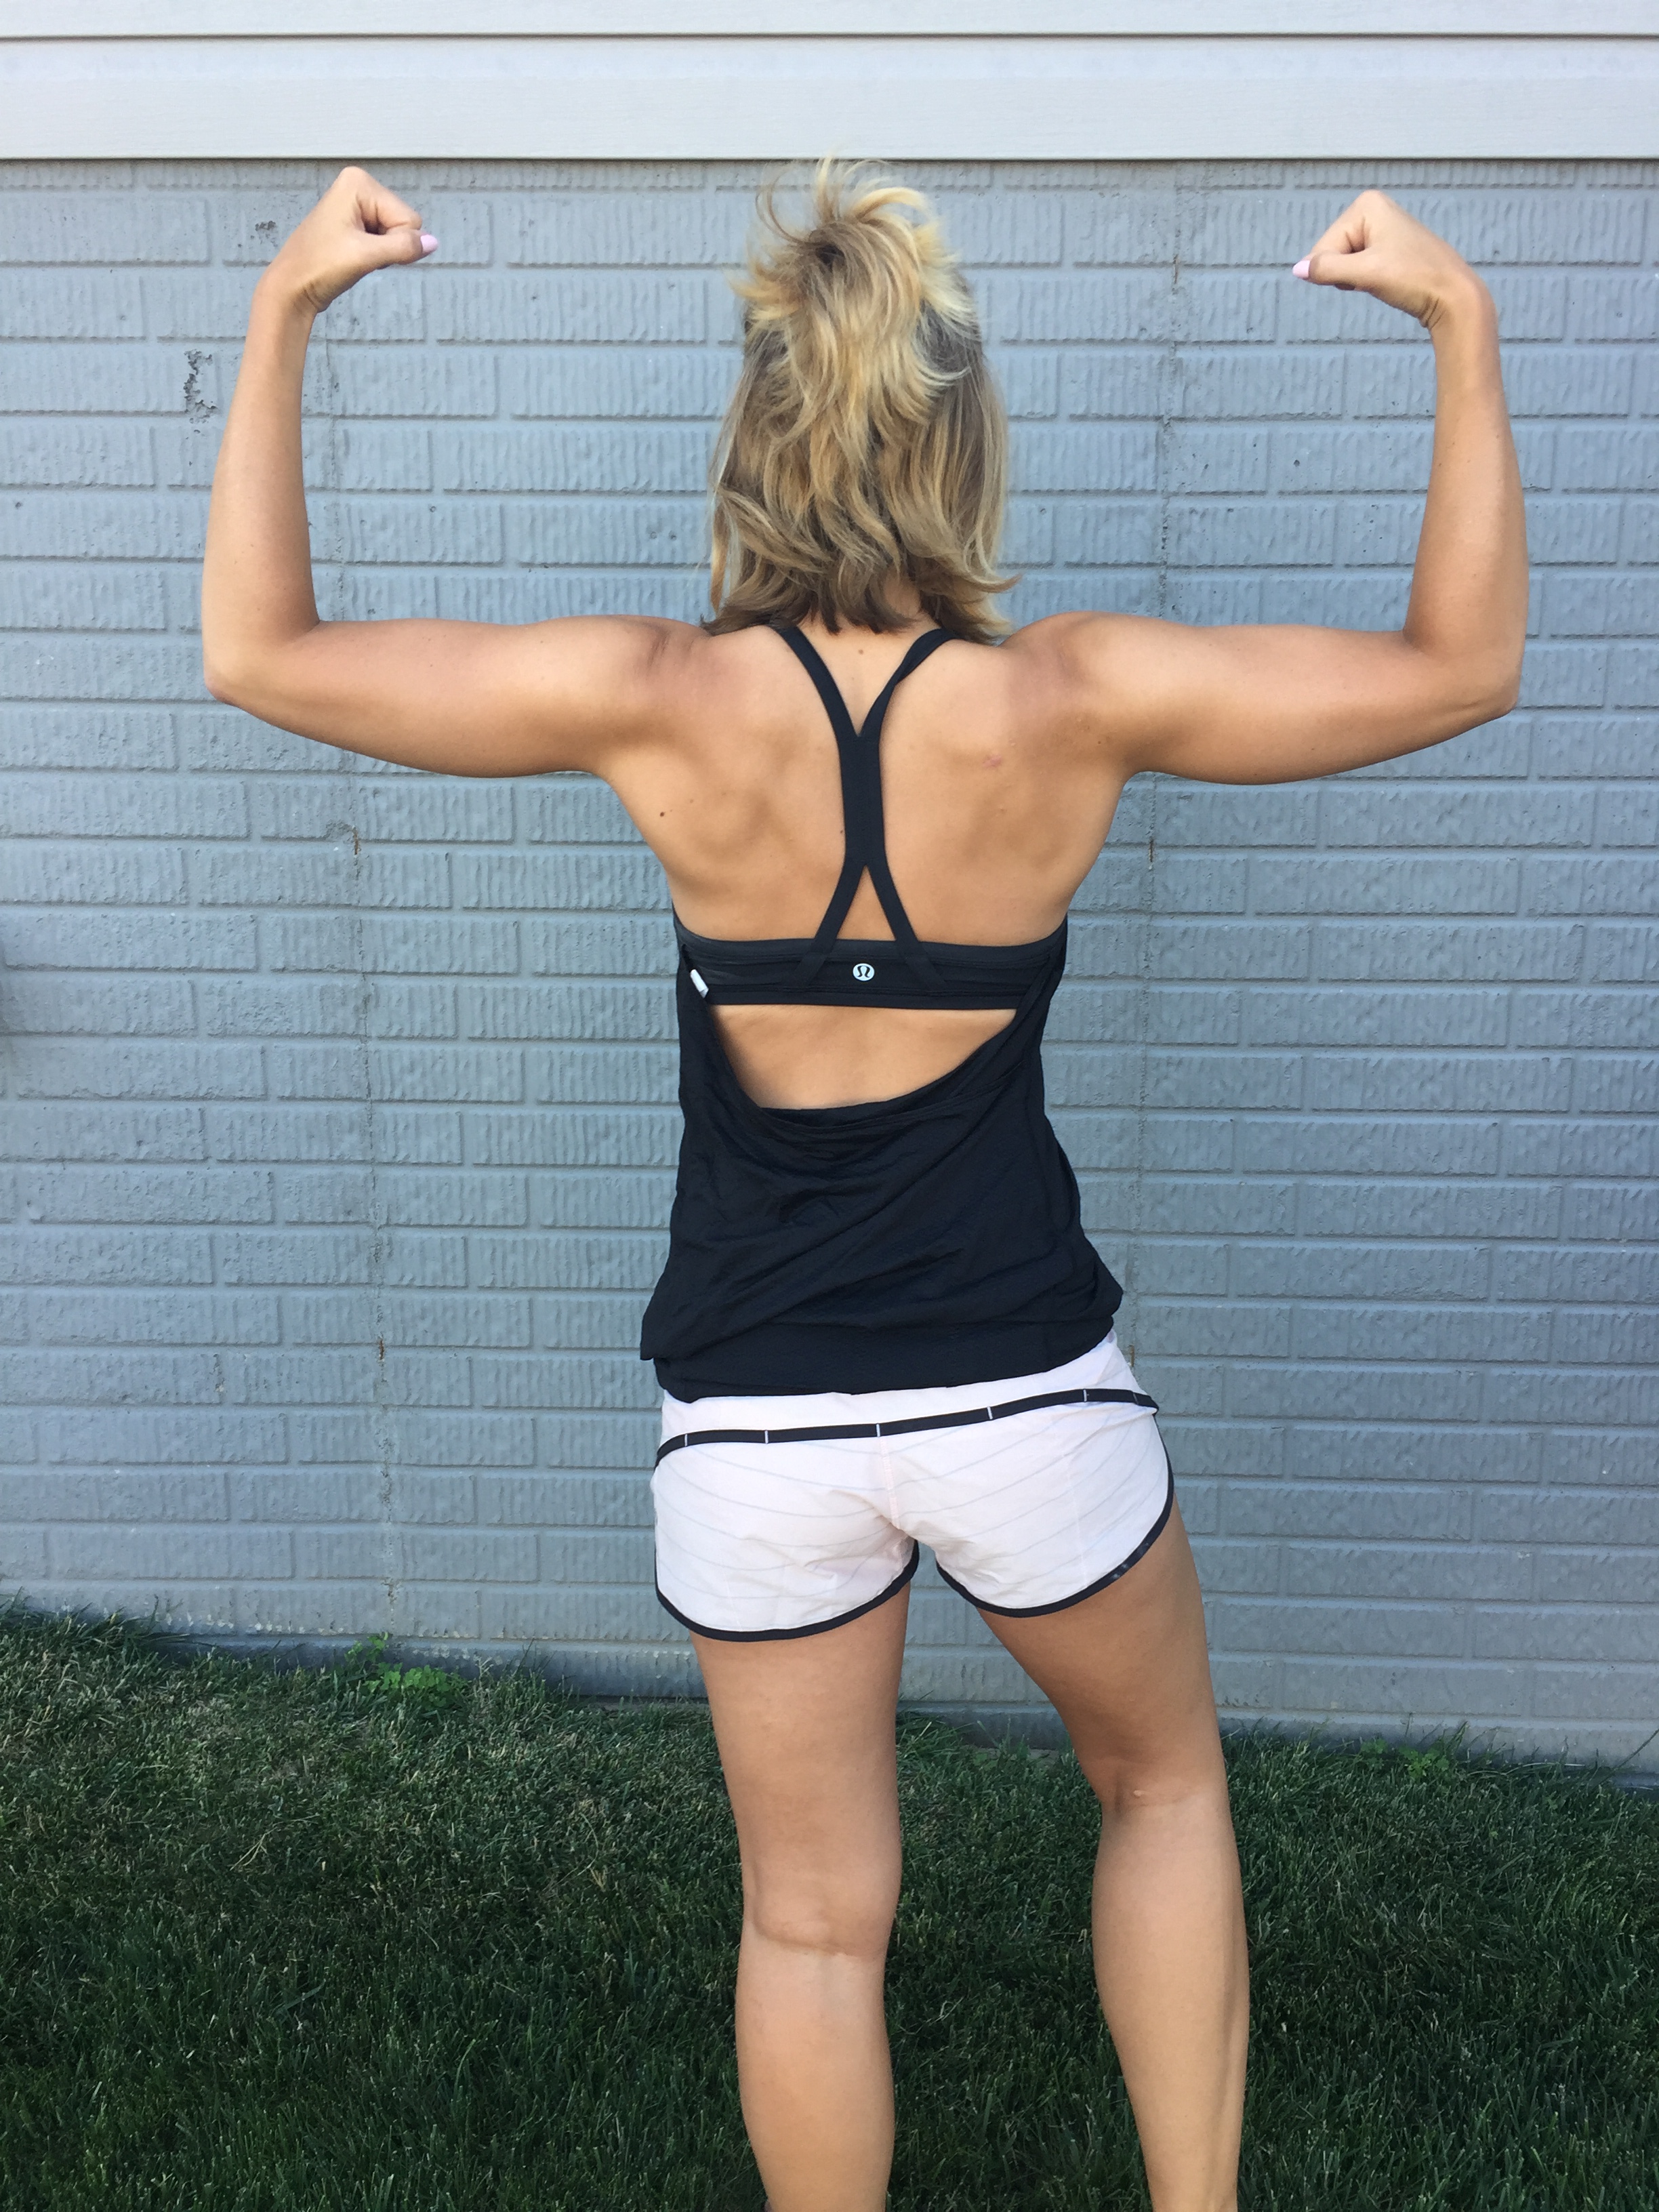 Workout Wednesday: Back to Normal